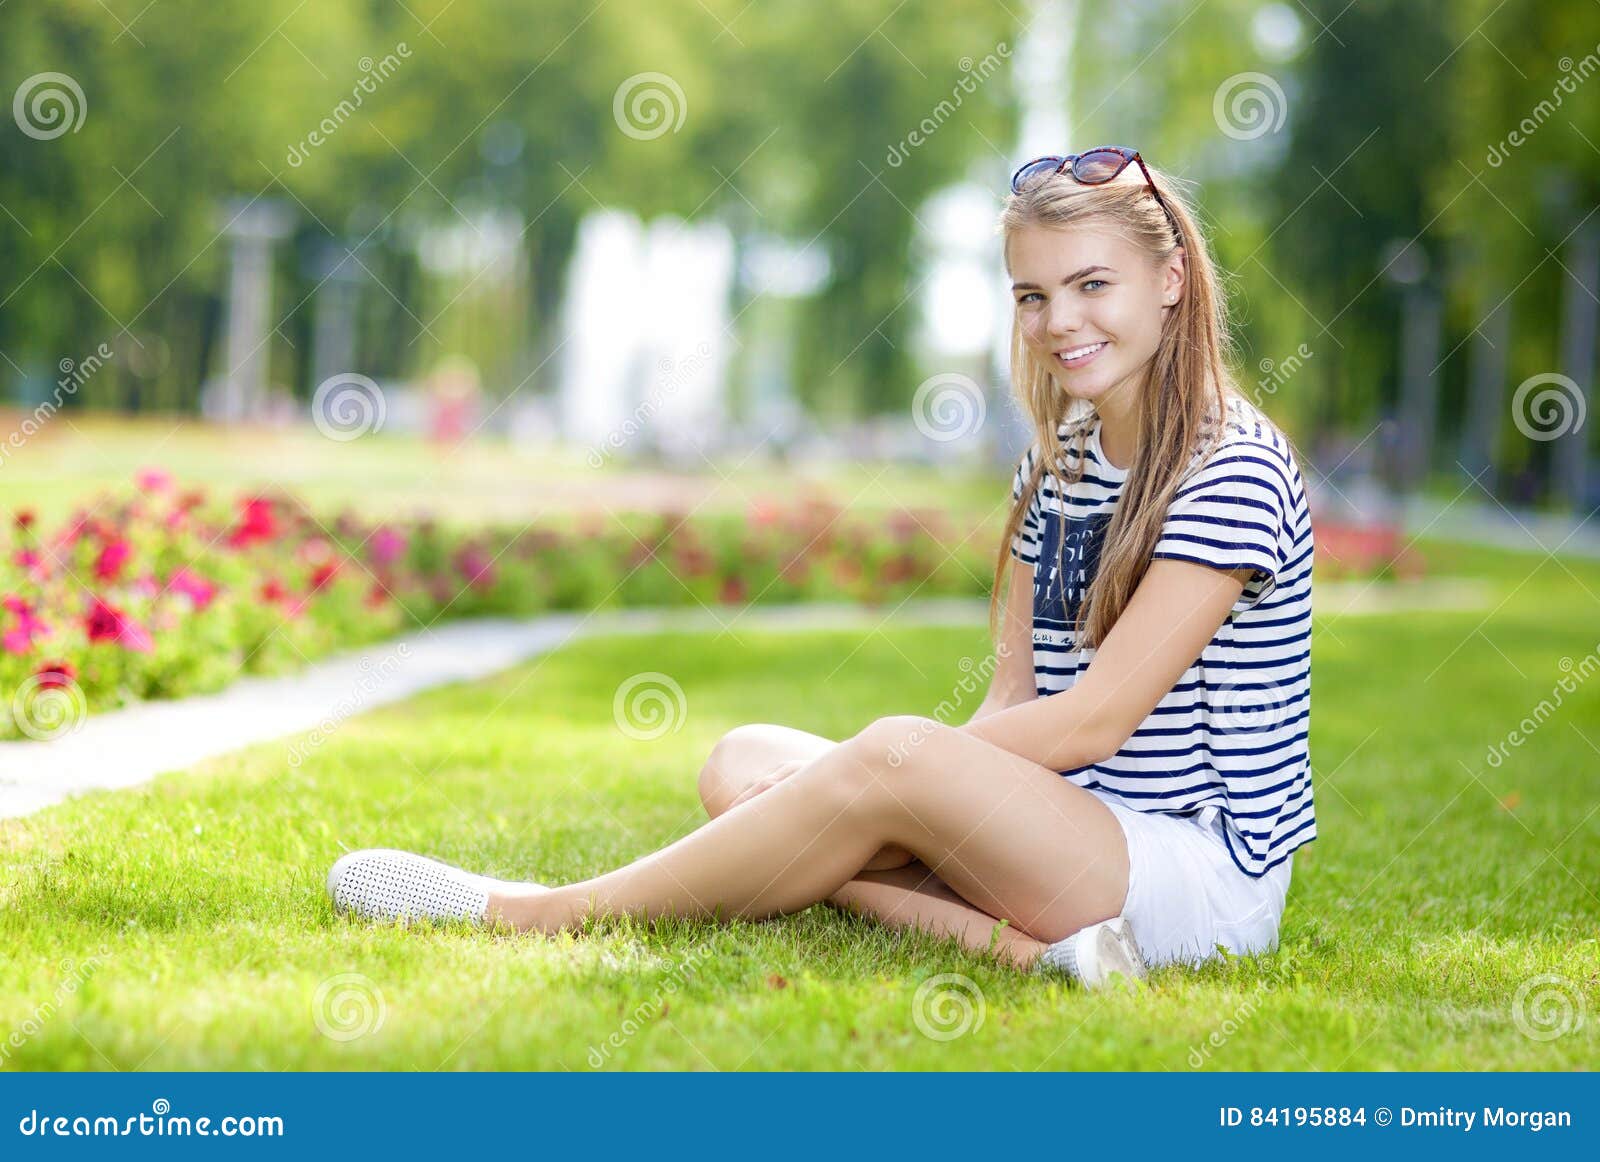 Happy Smiling Caucasian Teenage Girl Posing on the Grass in Green ...